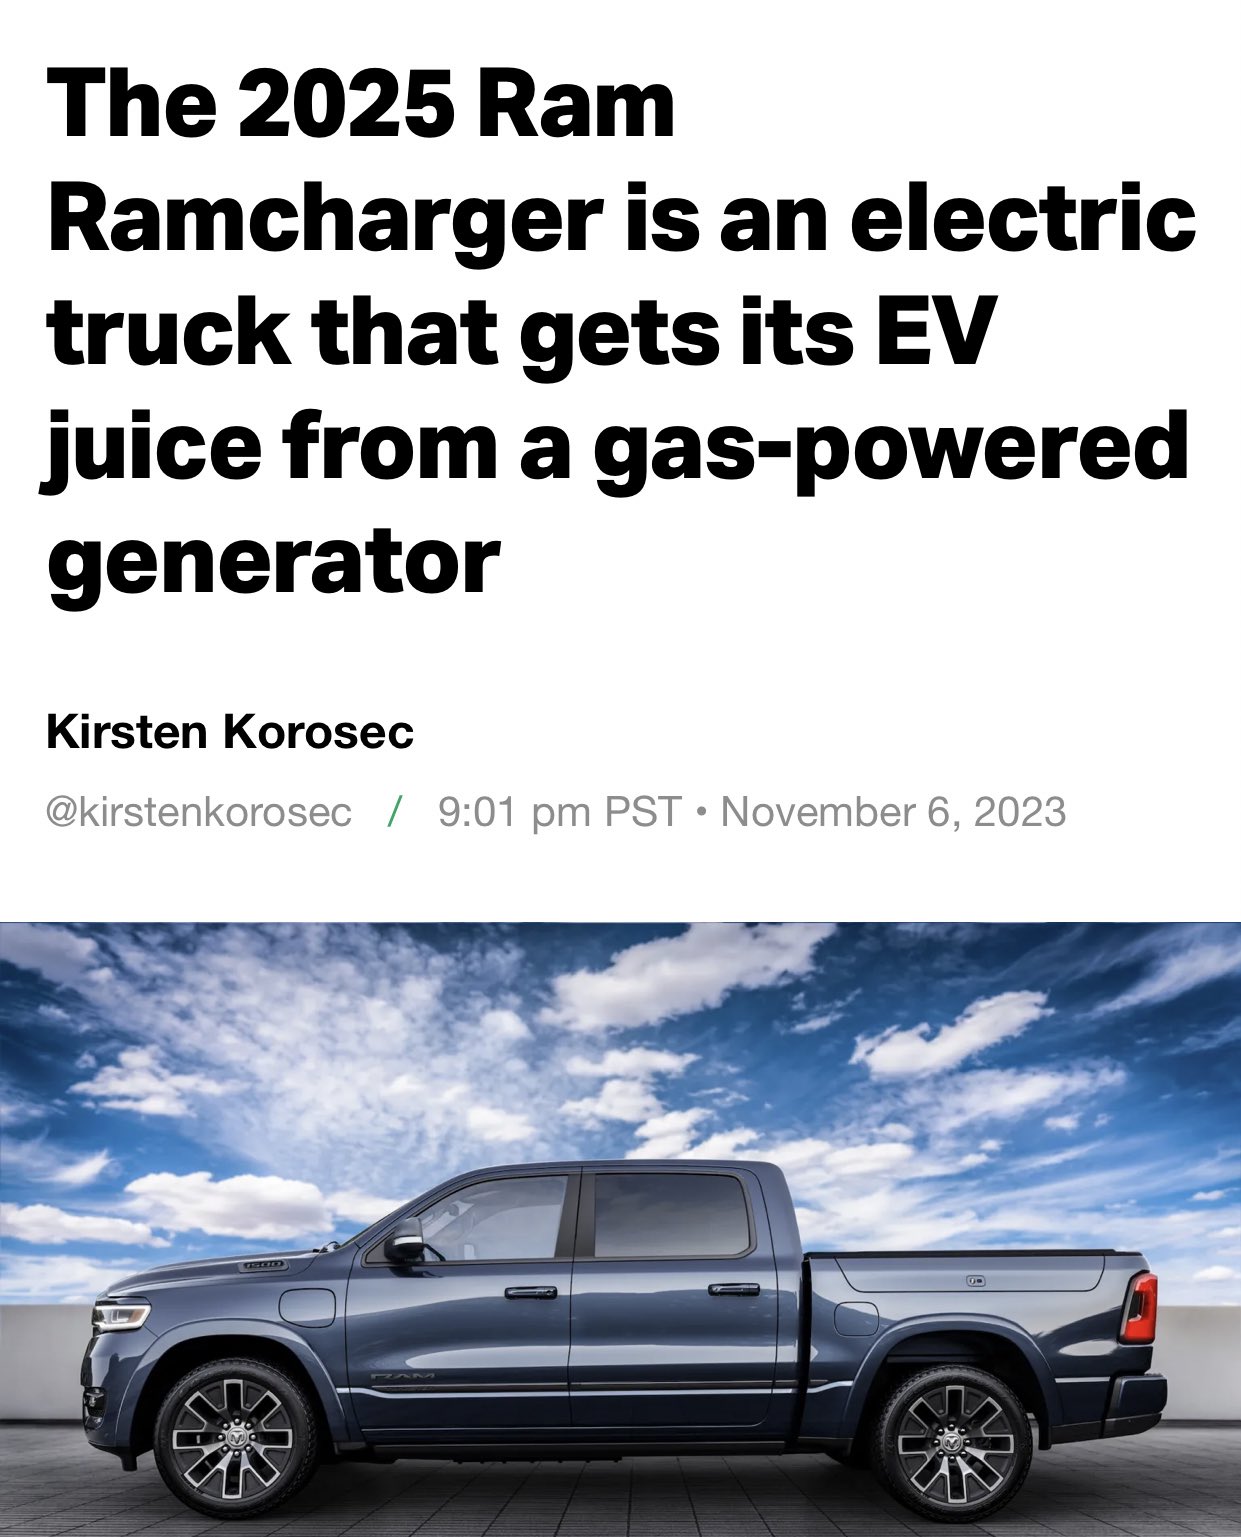 Detty on X: “This is going to be a game changer for the battery electric  truck,” Ram CEO Tim Kuniskis said…In other words, the Ramcharger is a  bridge technology that will eventually